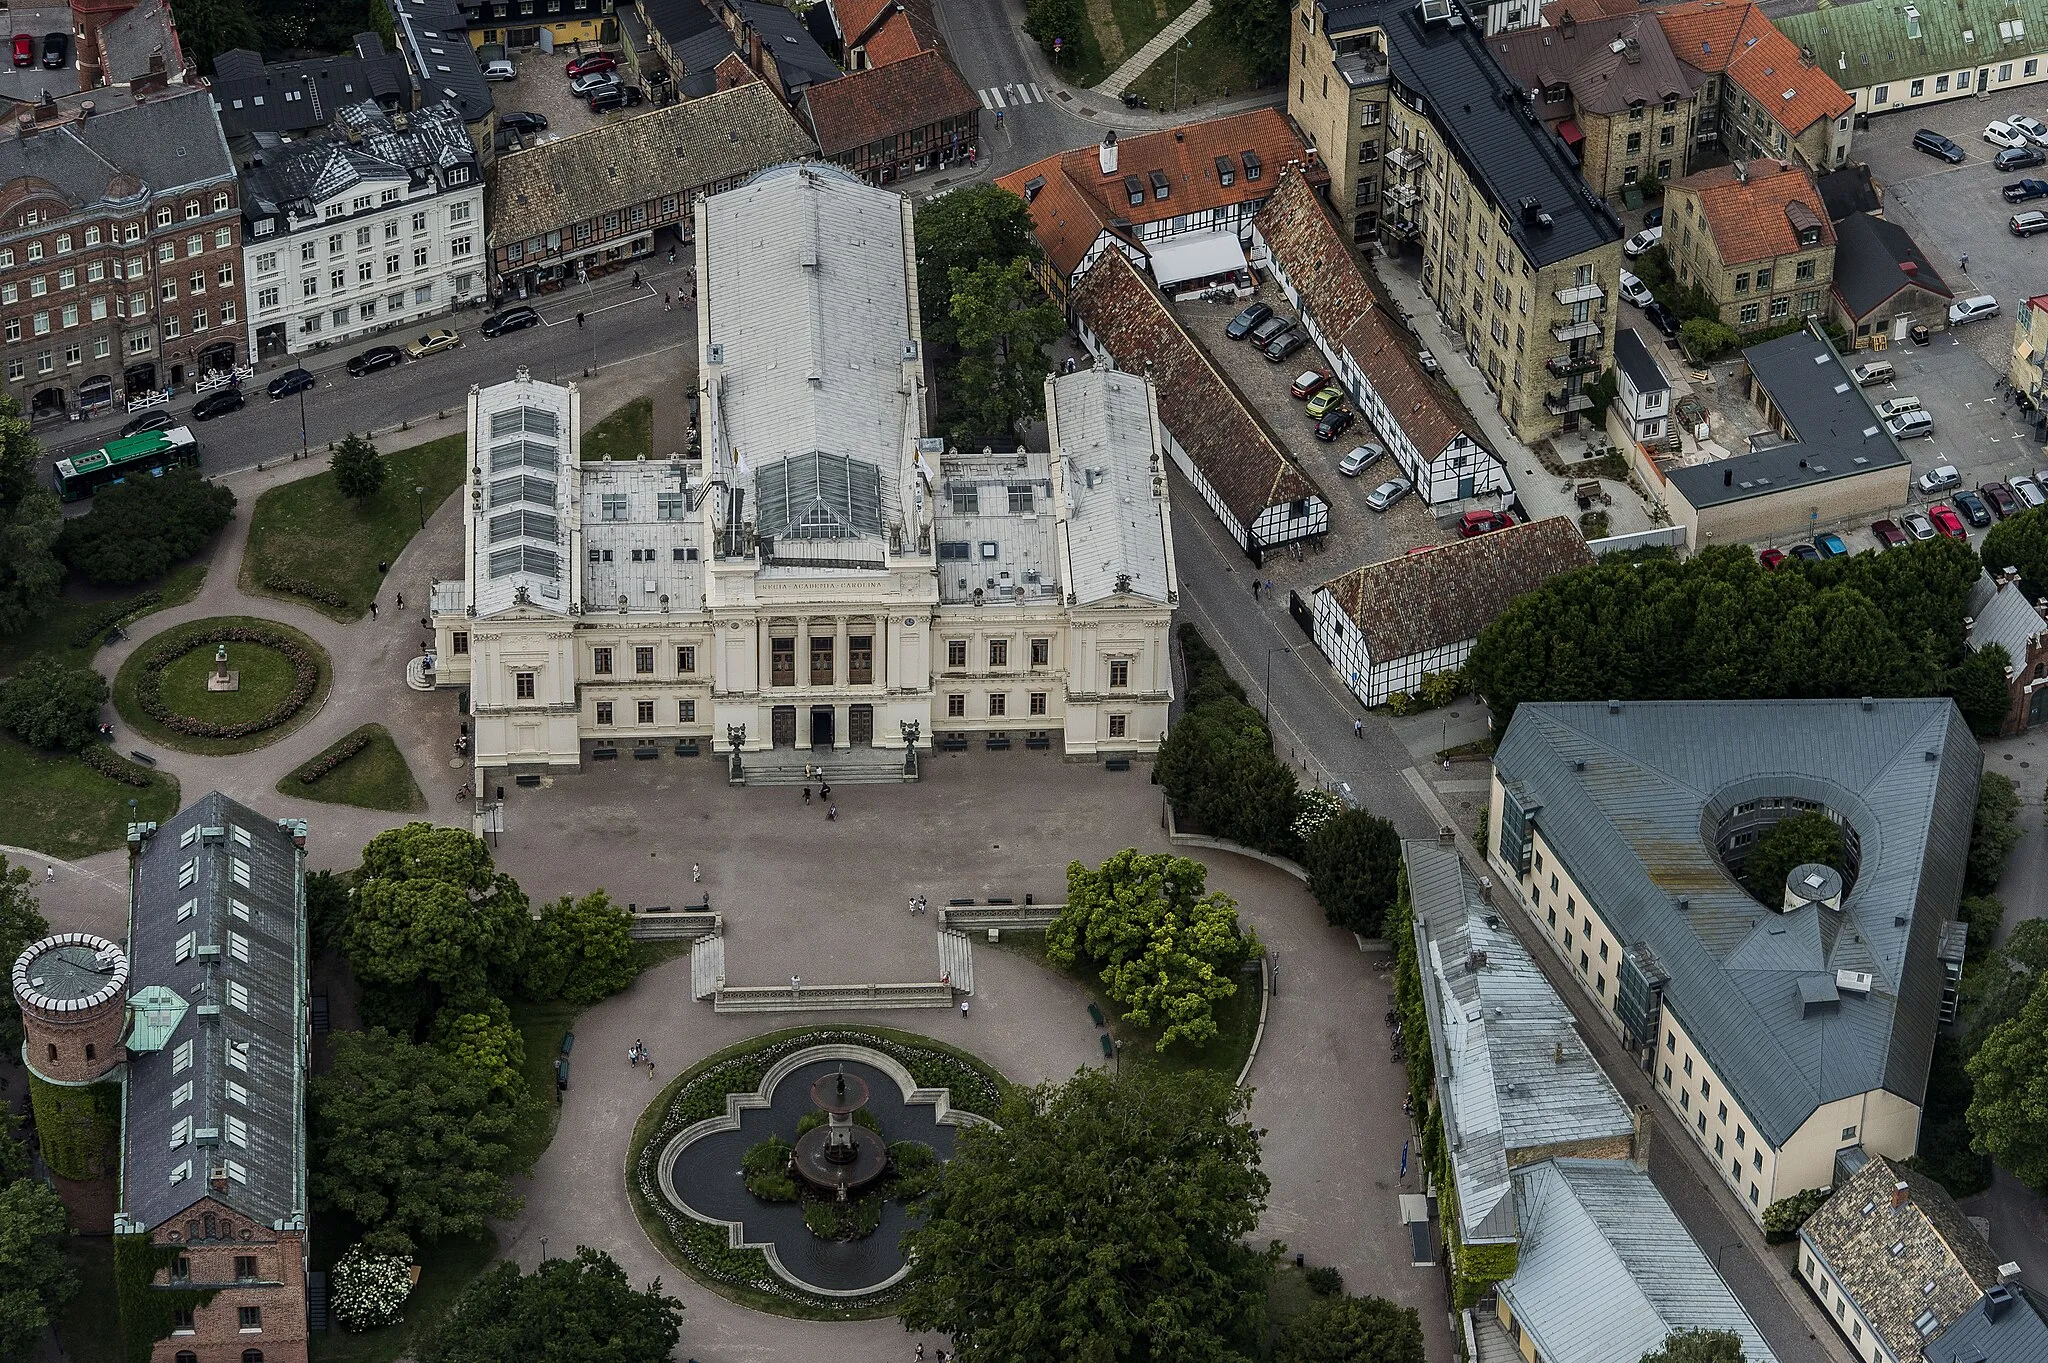 Photo showing: The university of Lund